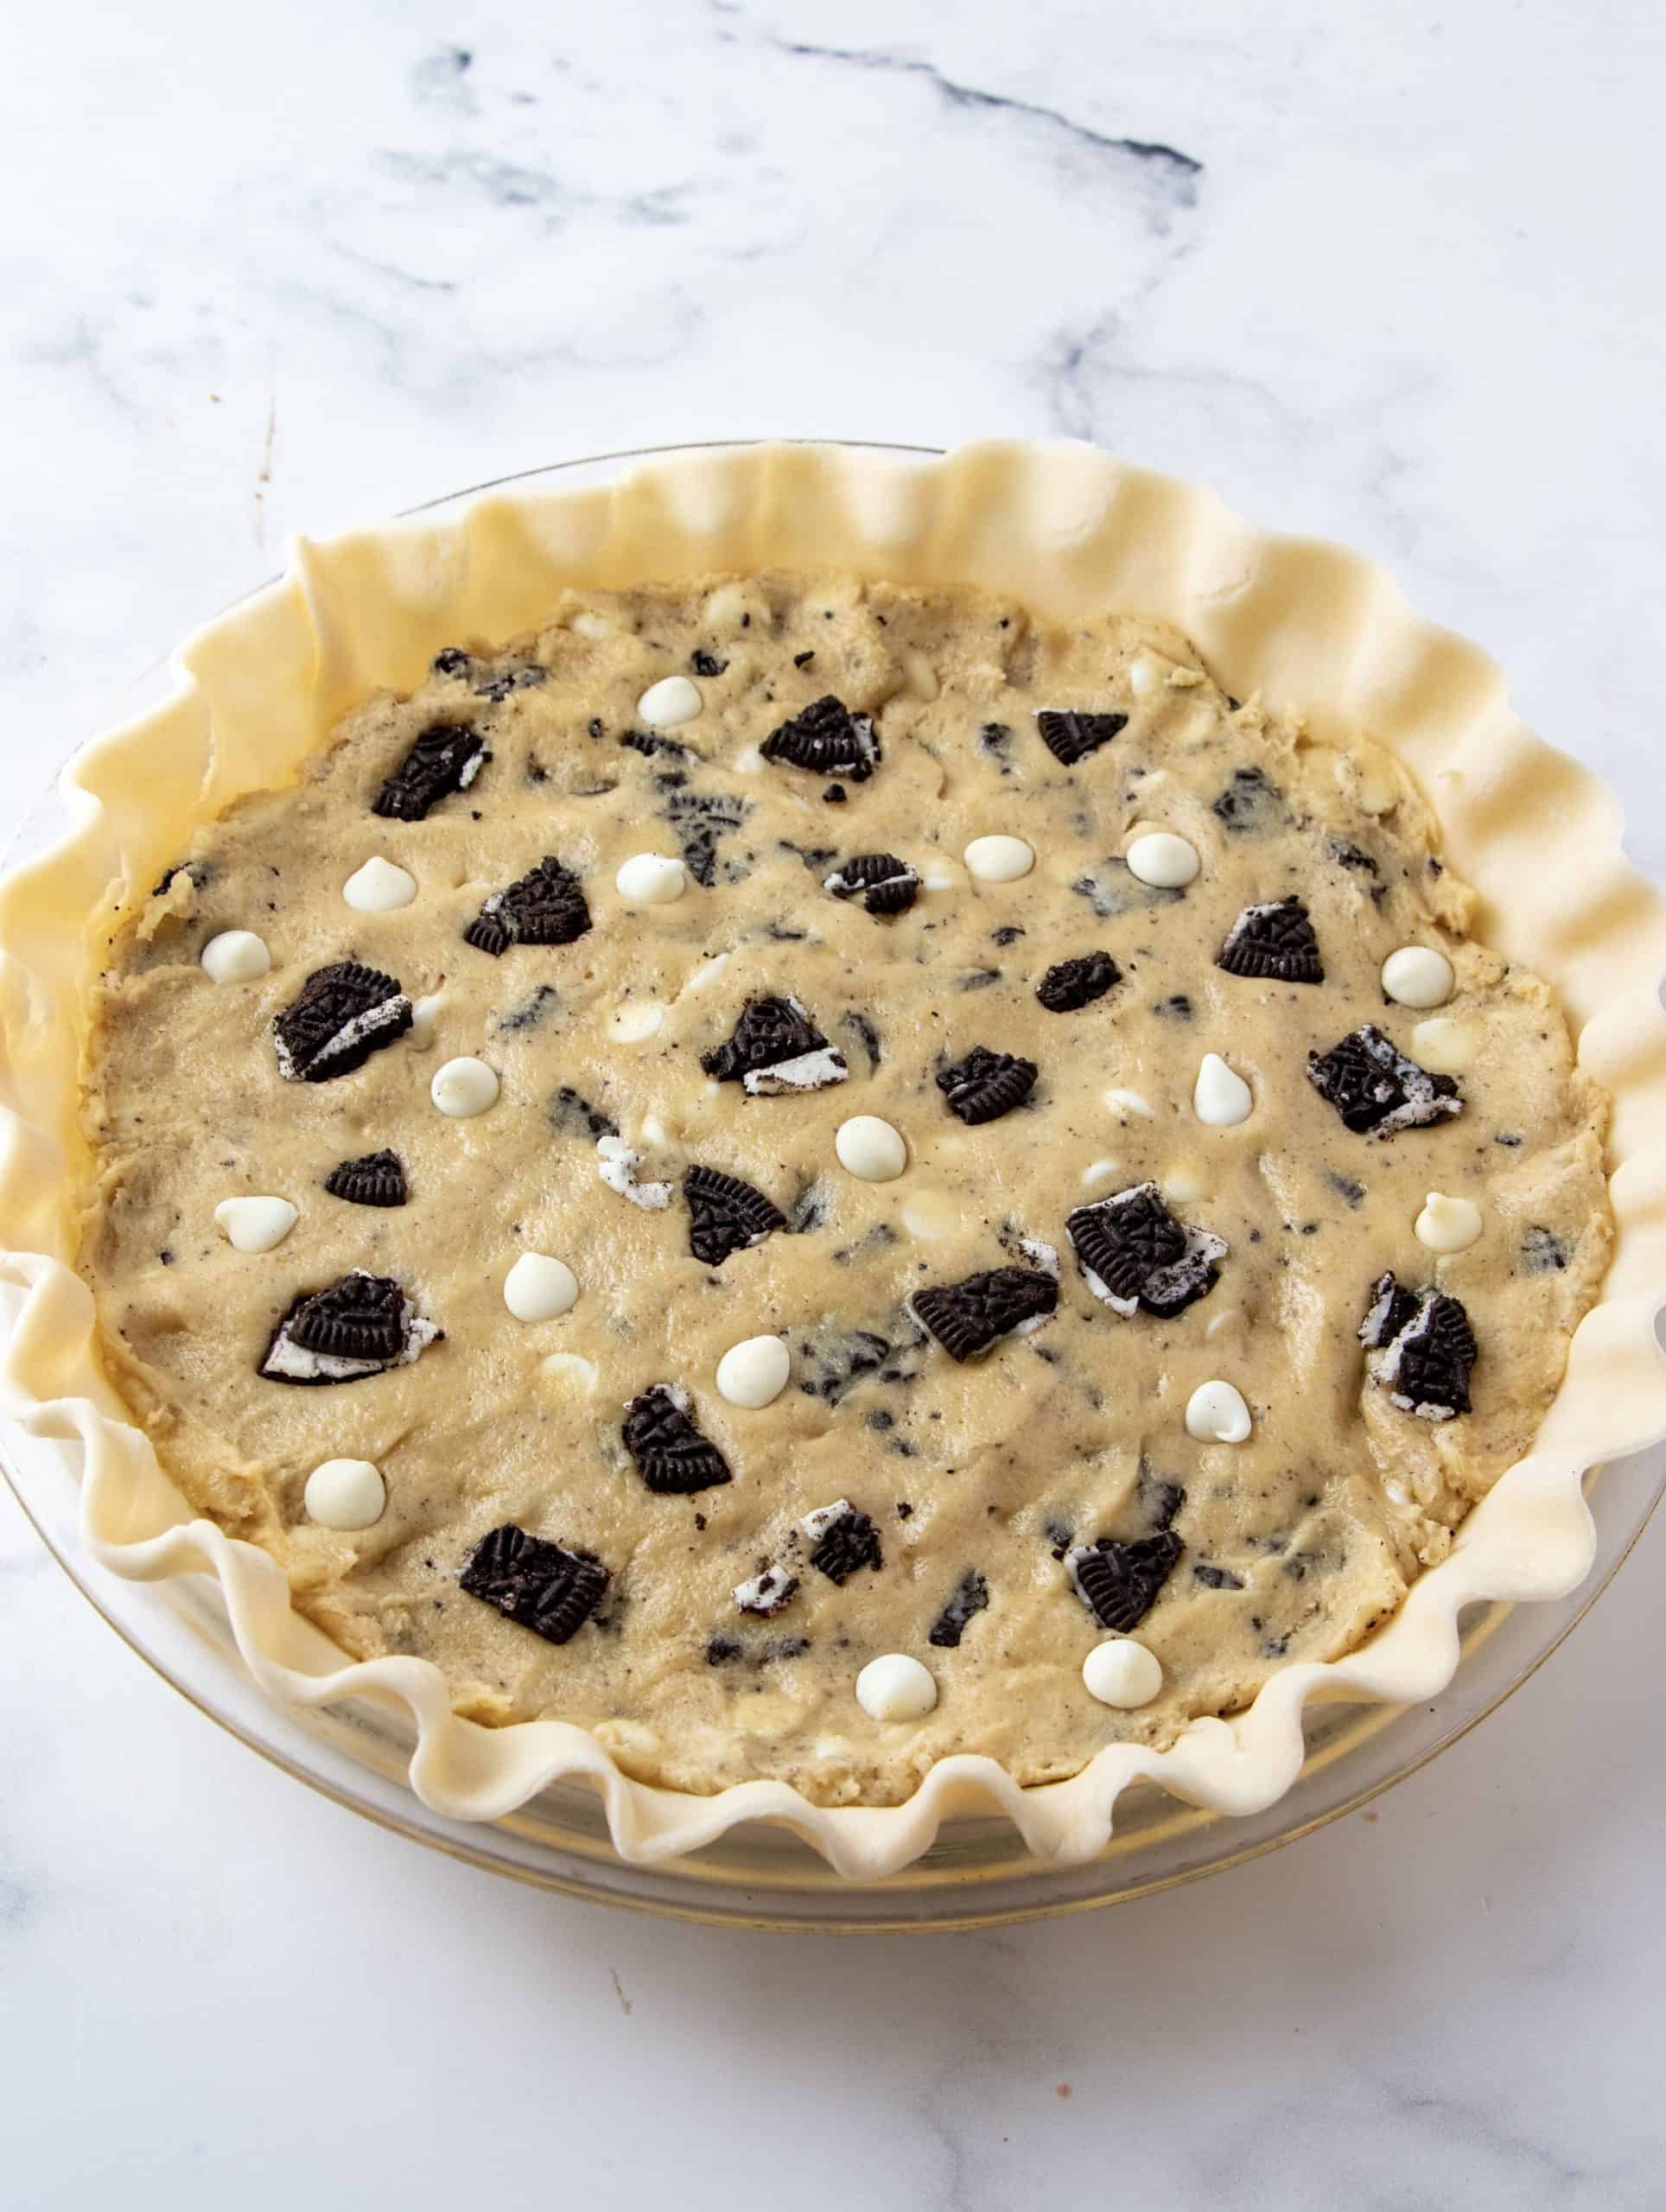 Oreo Cookie Pie filling added to pie crust.